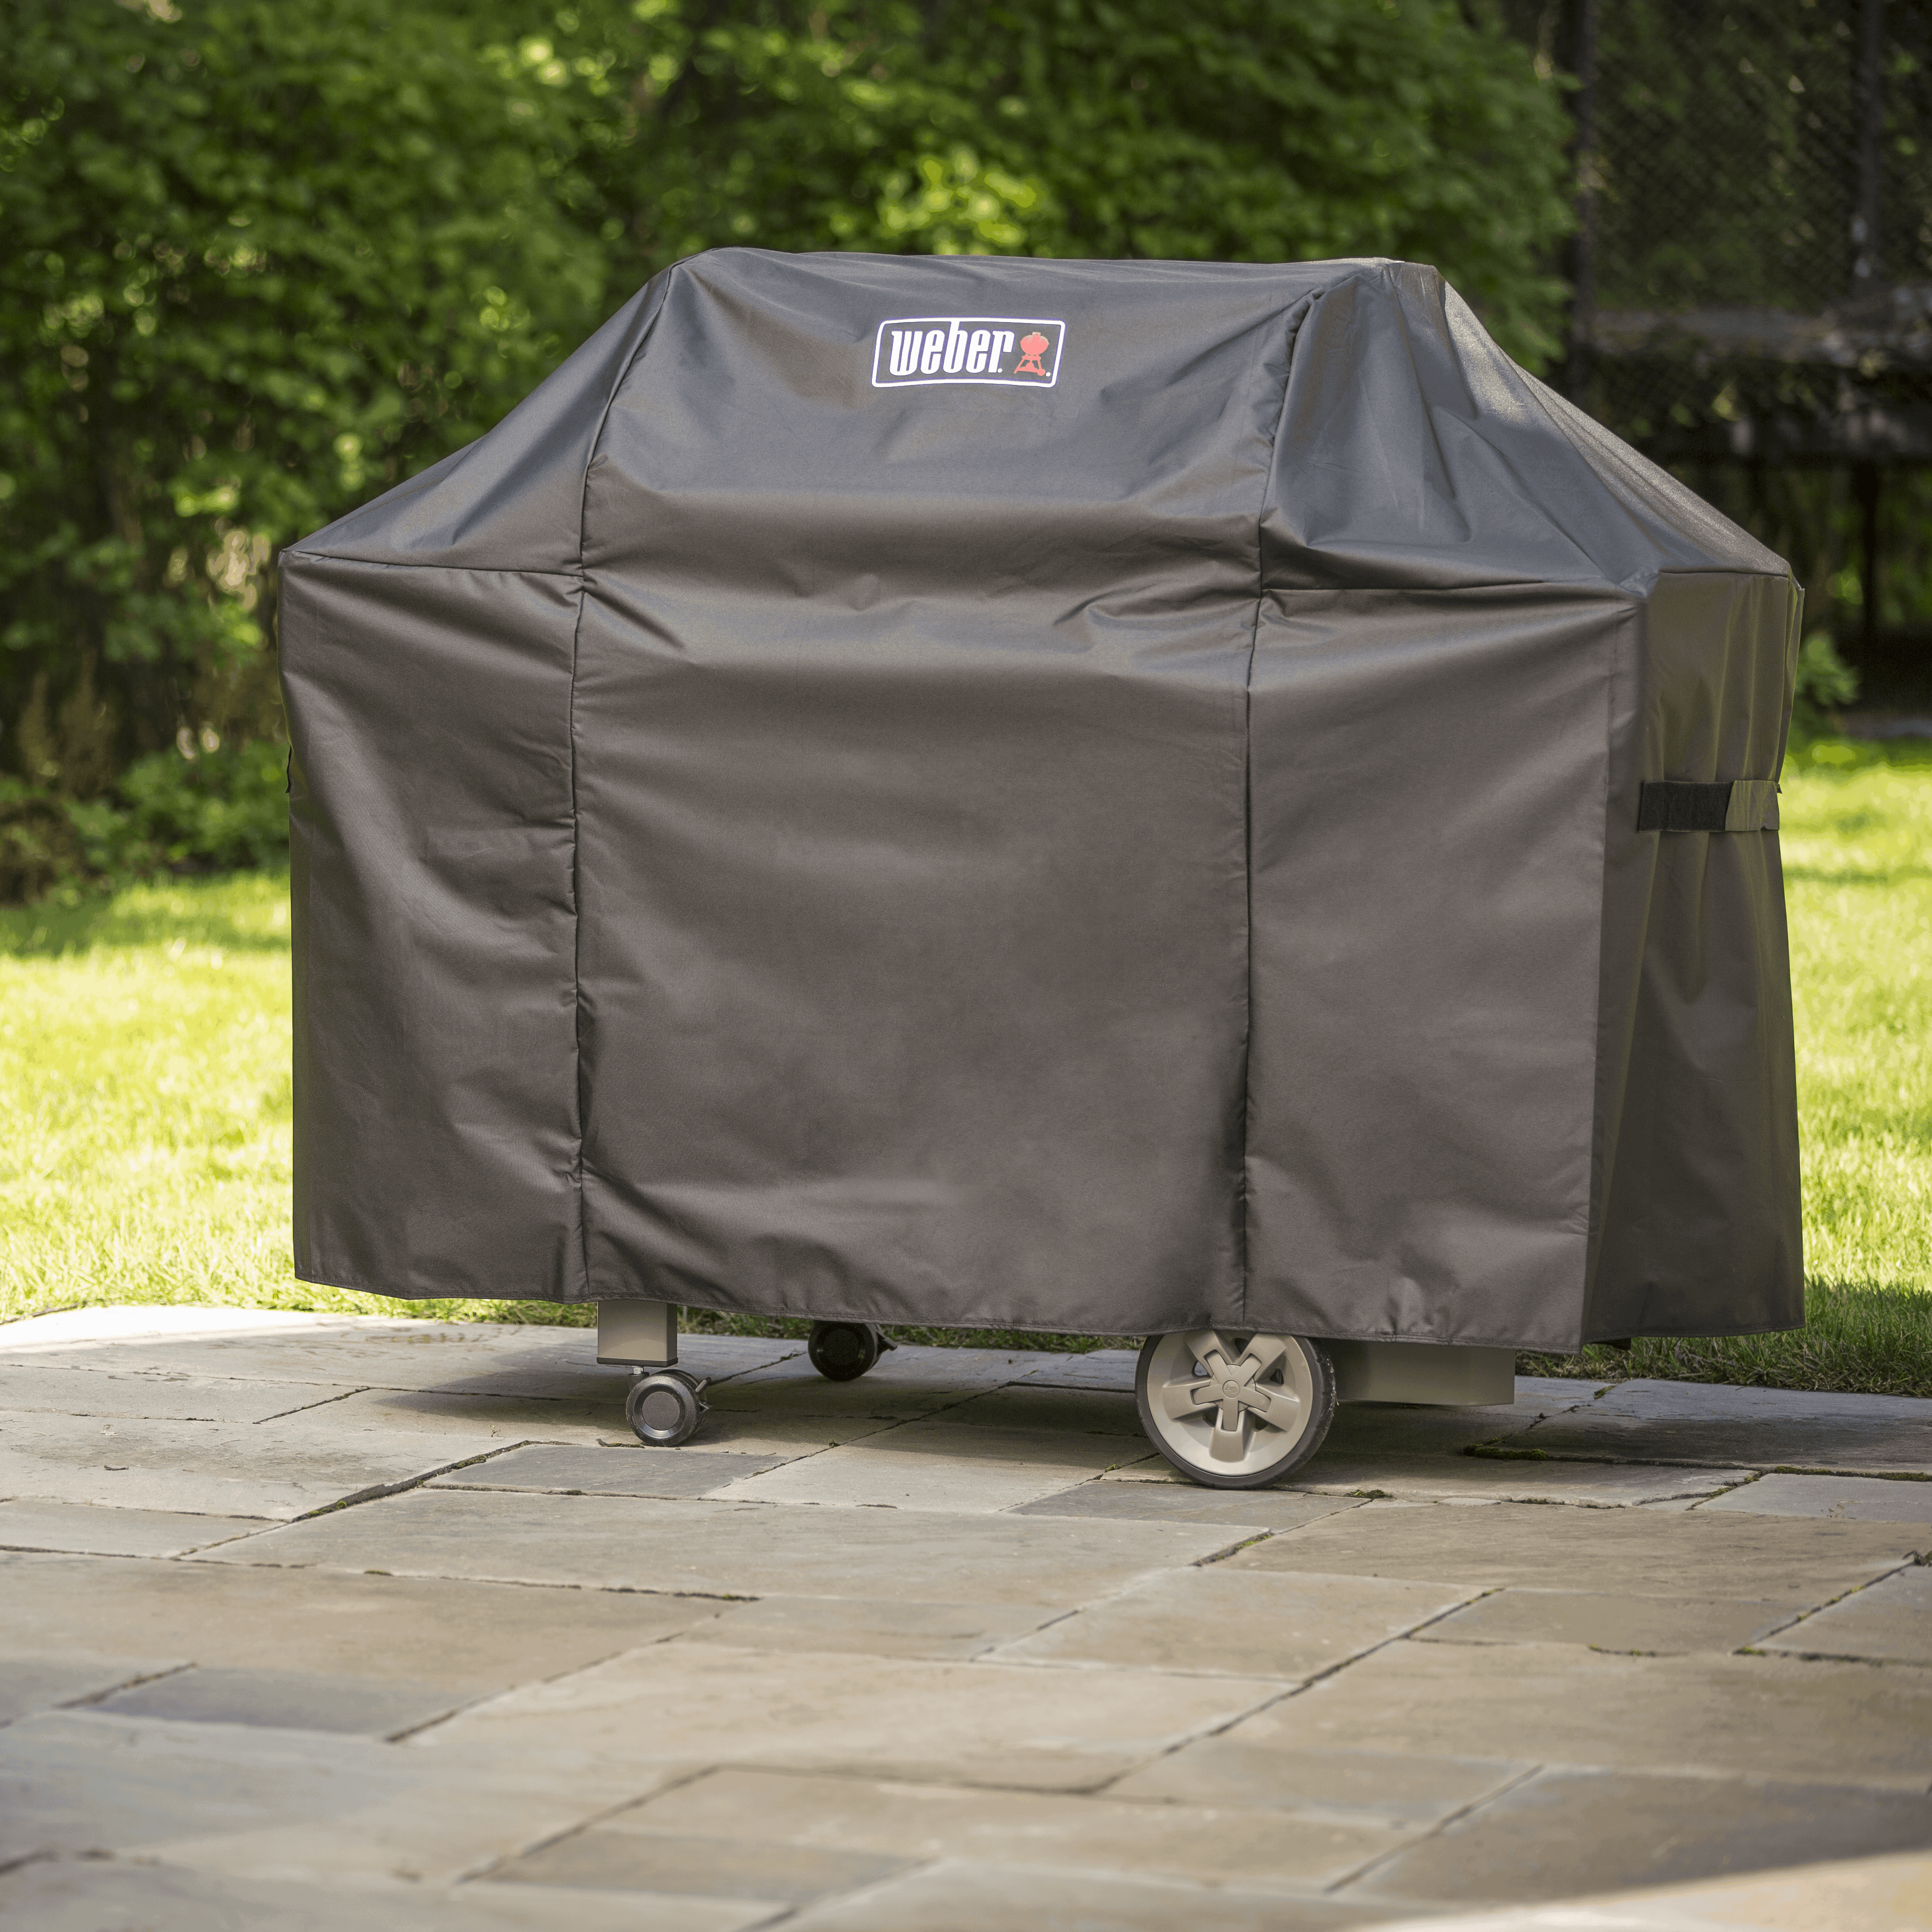 Genesis 300 Series Grills GFTIME 7130 Grill Cover for Weber Genesis II 3 Burner Grill and Genesis II Genesis II LX 300 